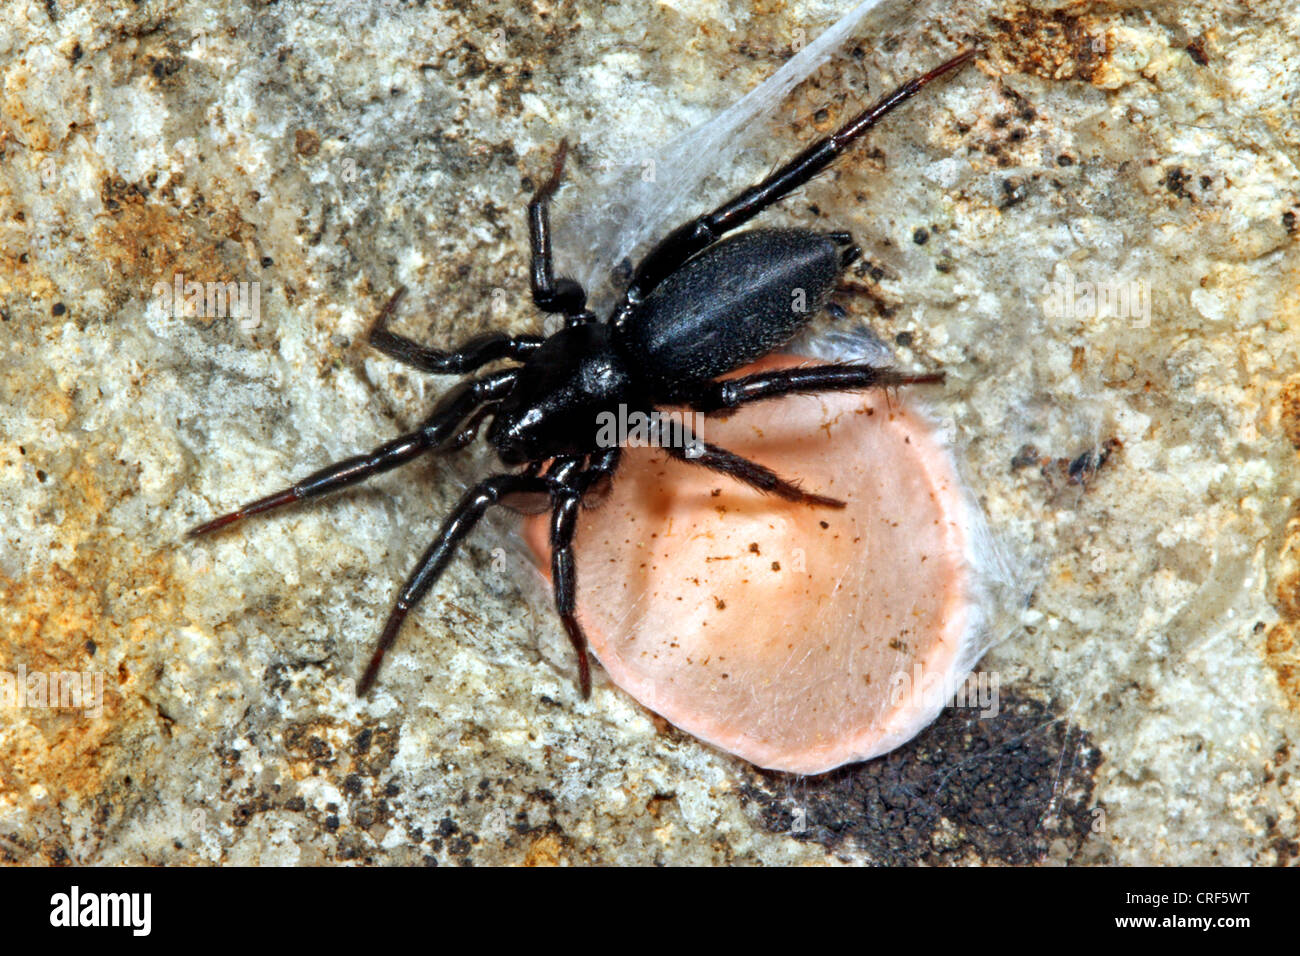 Ground spider (Zelotes subterraneus), female with cocoon on a stone Stock Photo